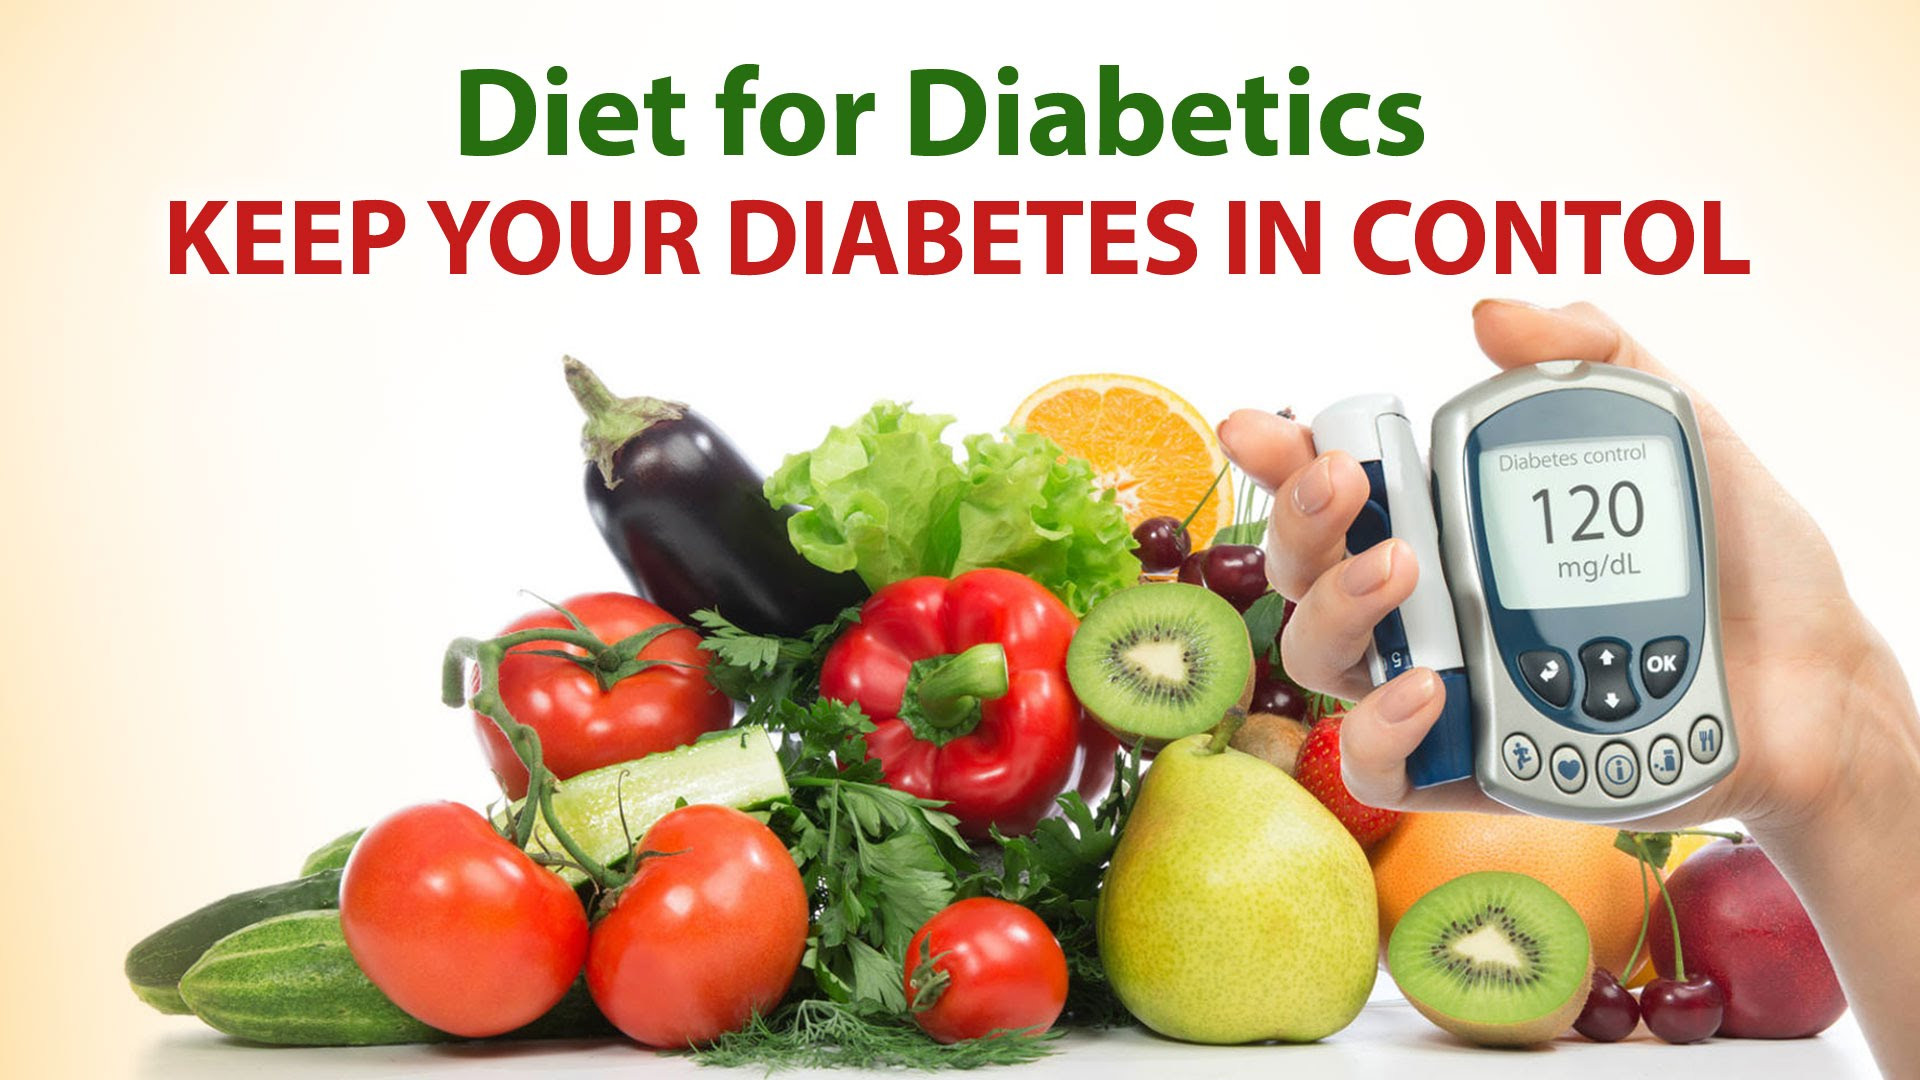 Diabetic Recipes For Weight Loss
 The Diabetic Diet and Diabetic Diet Plan for Weight Loss